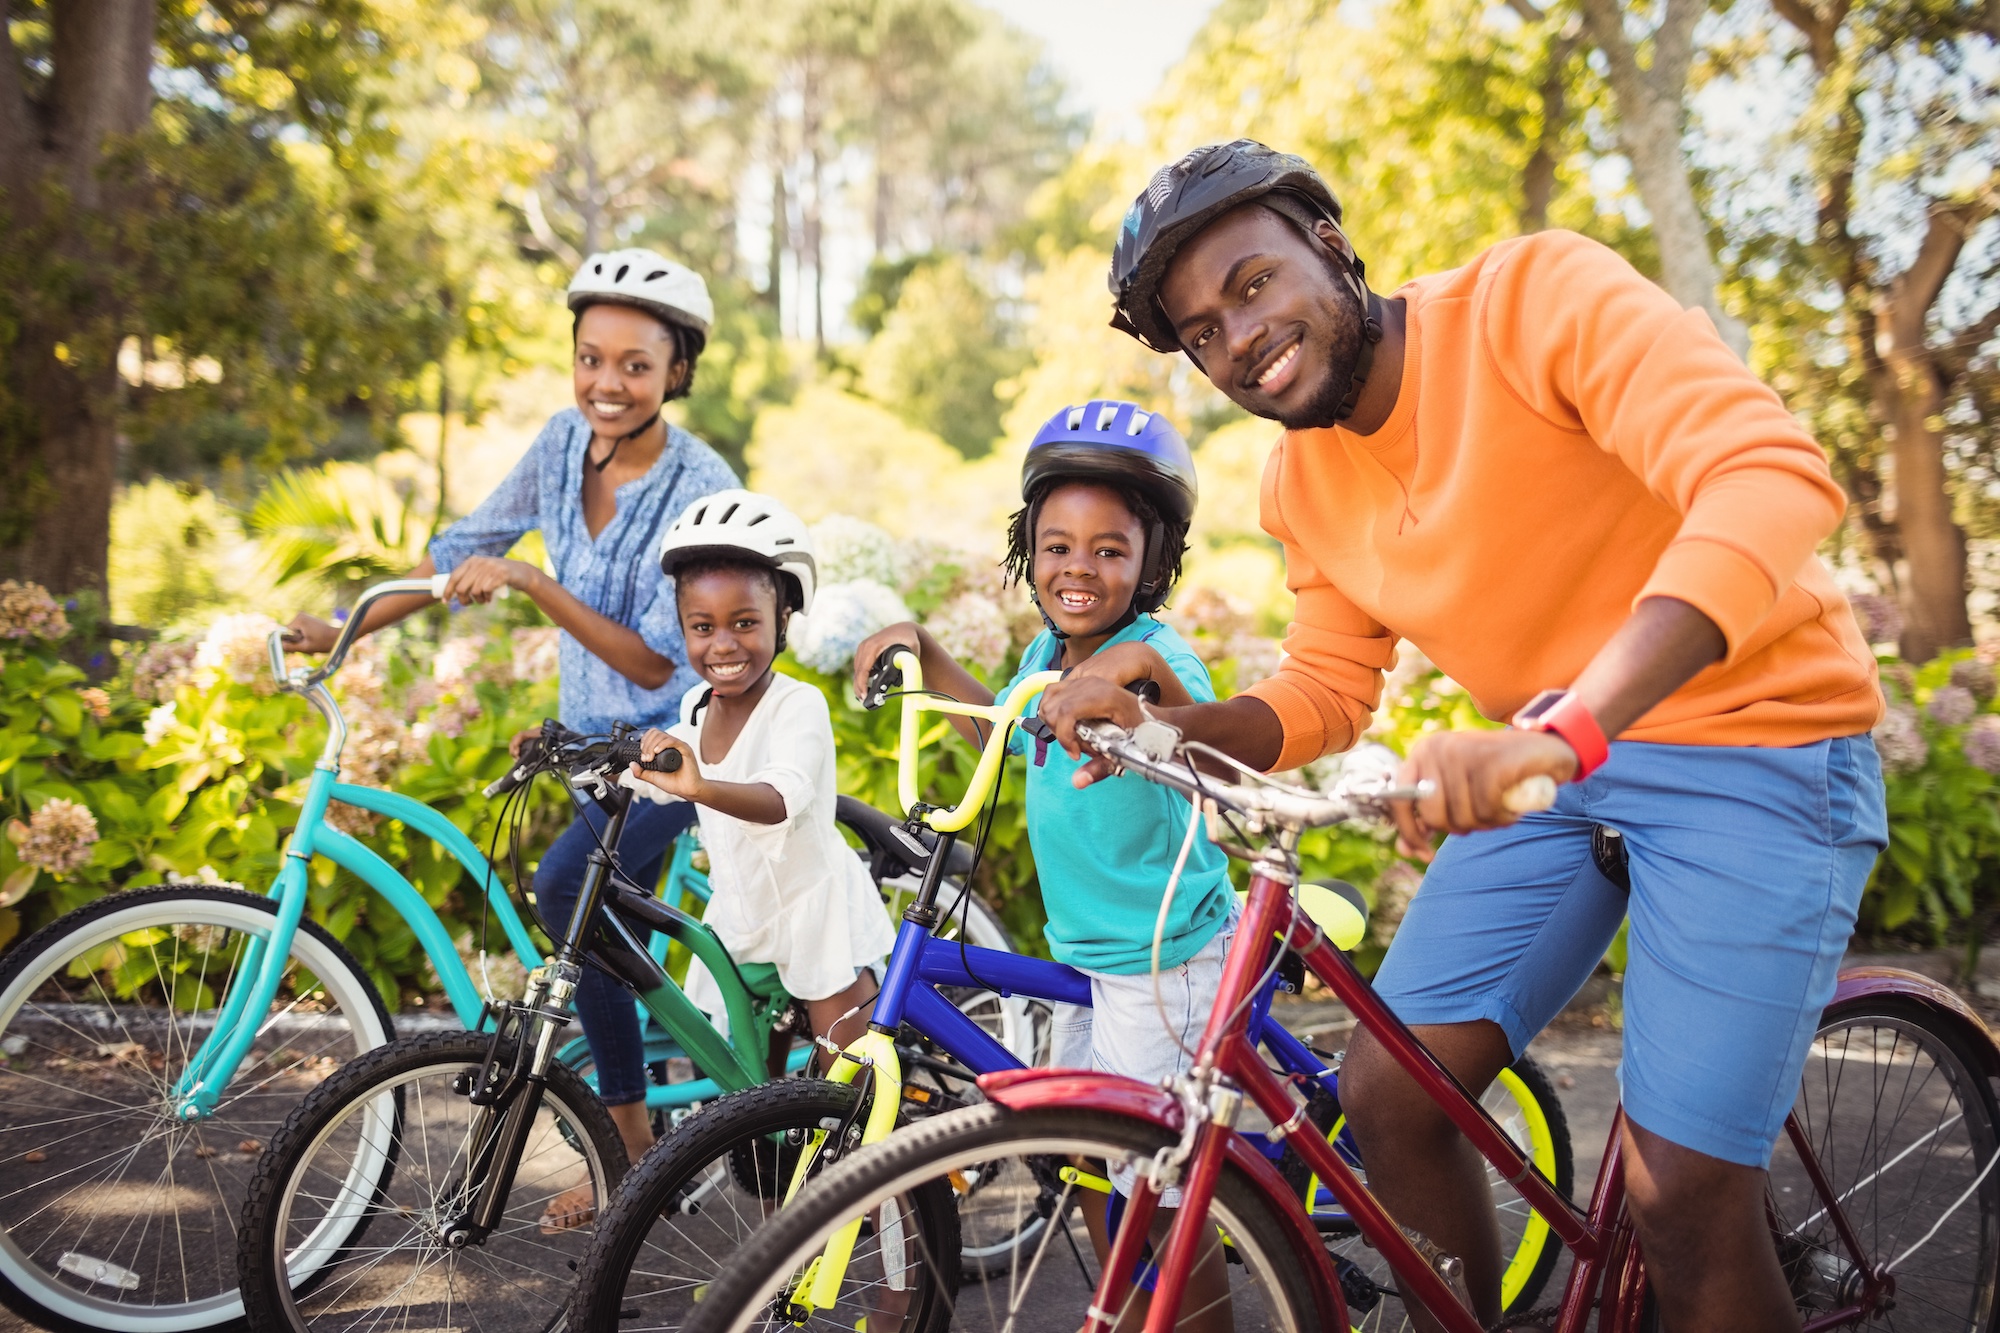 A Parent’s Guide to Bicycle Safety - Premier Pediatric Urgent Care Provider in Texas - Little Spurs Pediatric Urgent Care